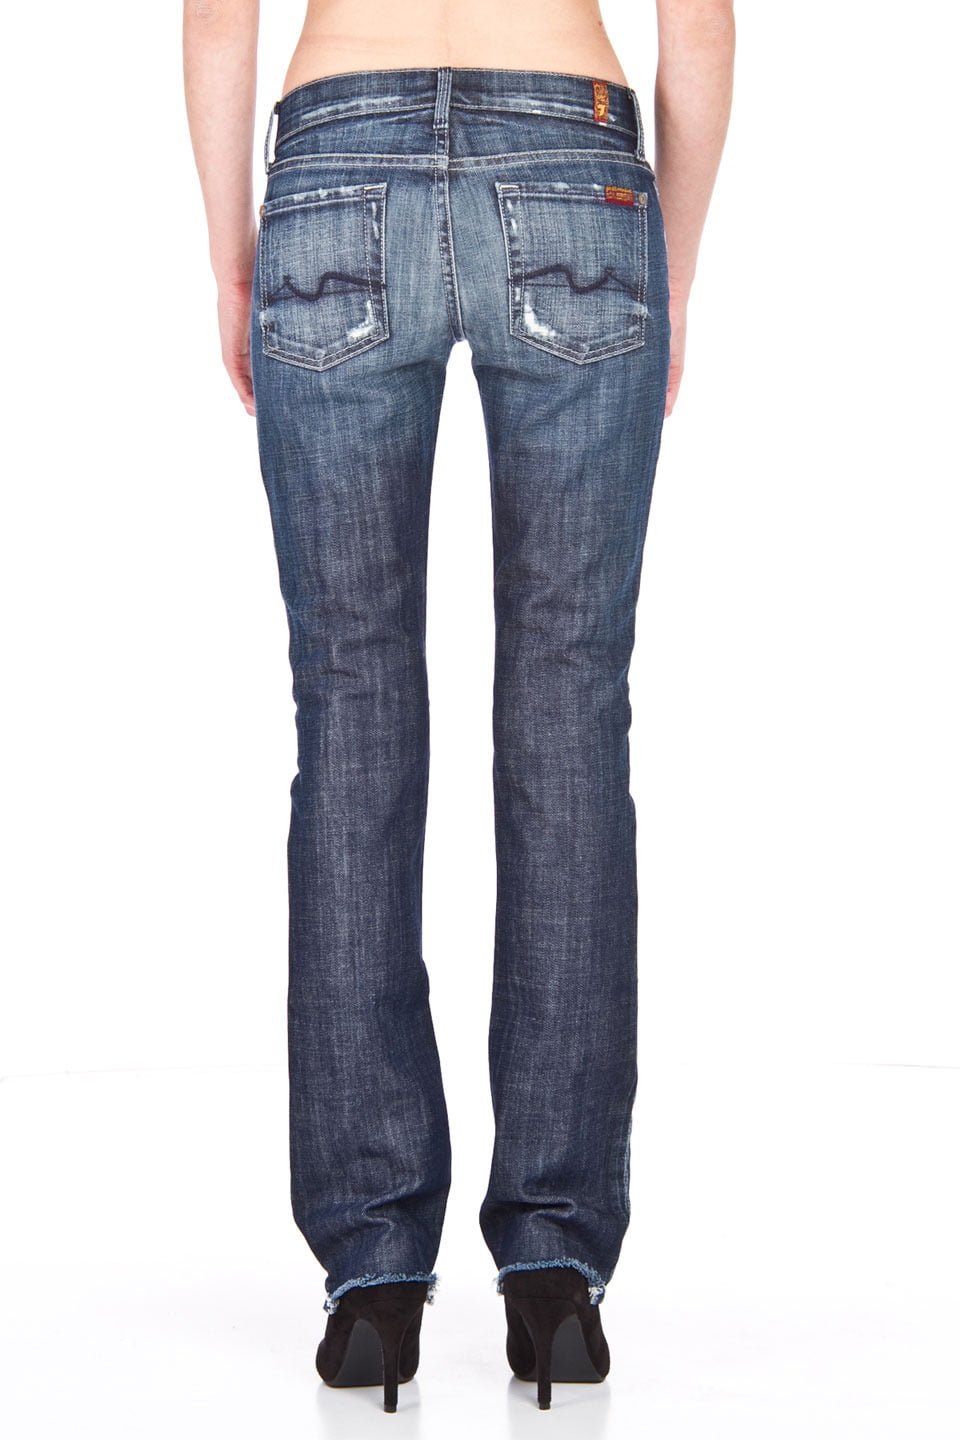 Seven For All Mankind Ladies Classic Straight Leg Jeans in Stone Blue ...